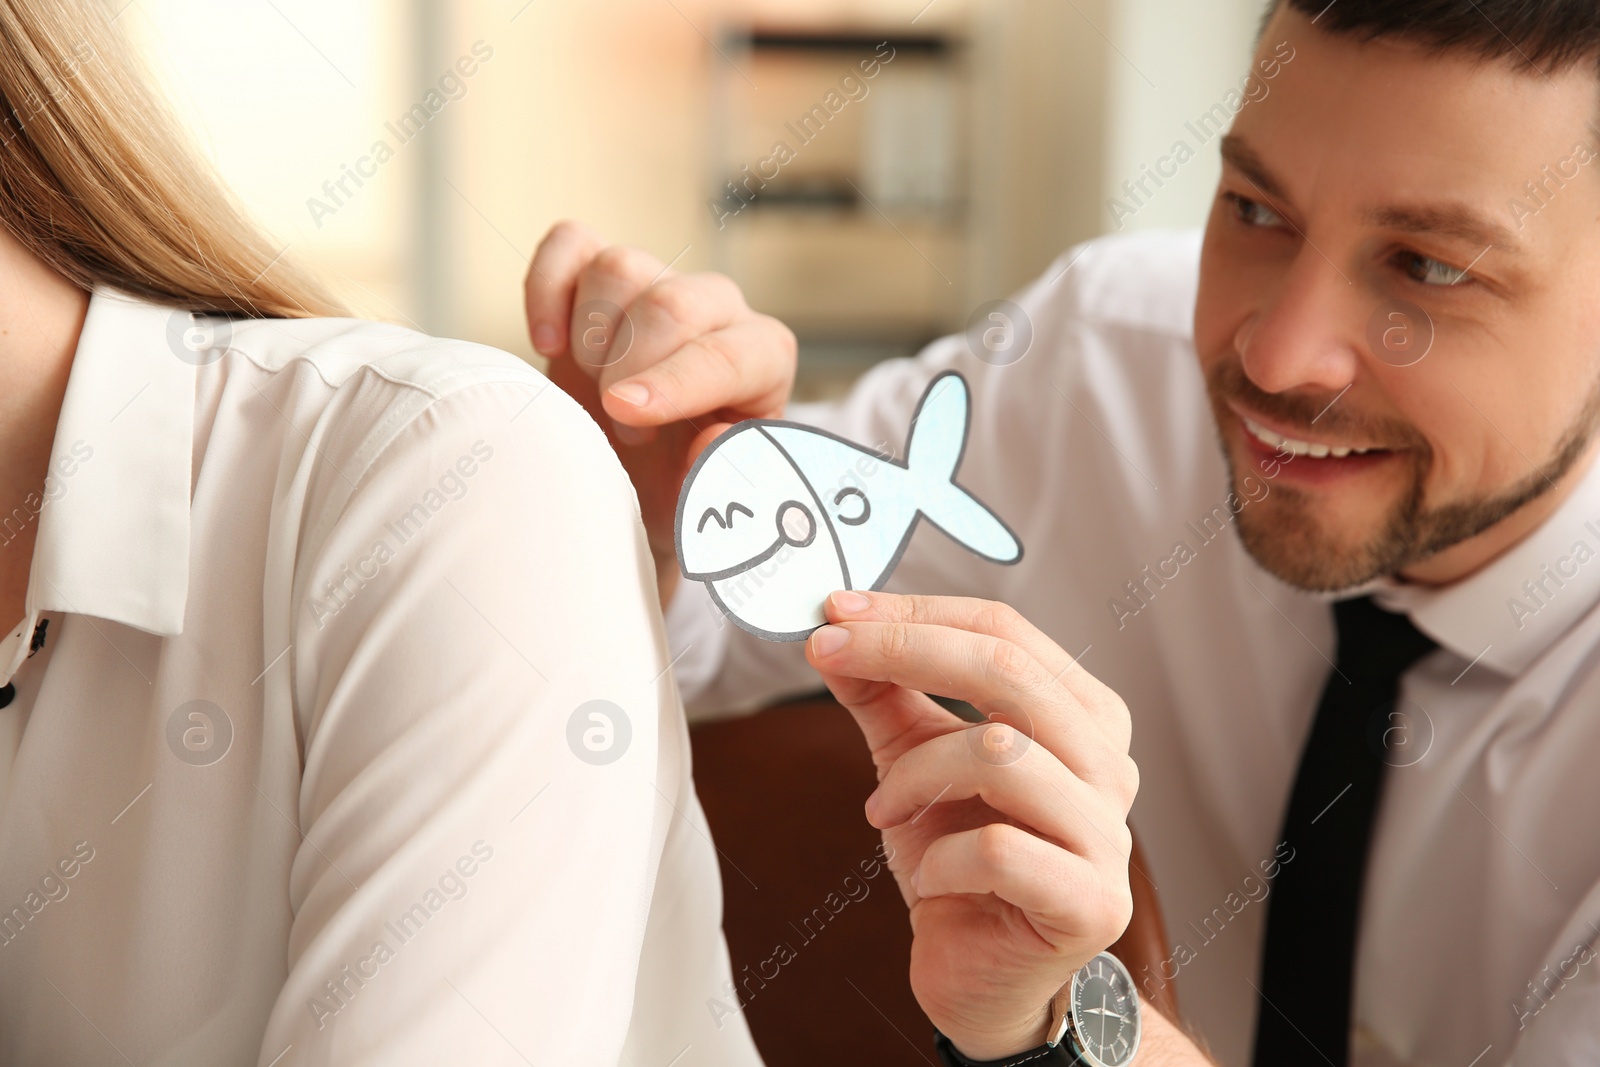 Photo of Man sticking paper fish to colleague's back in office. Funny joke